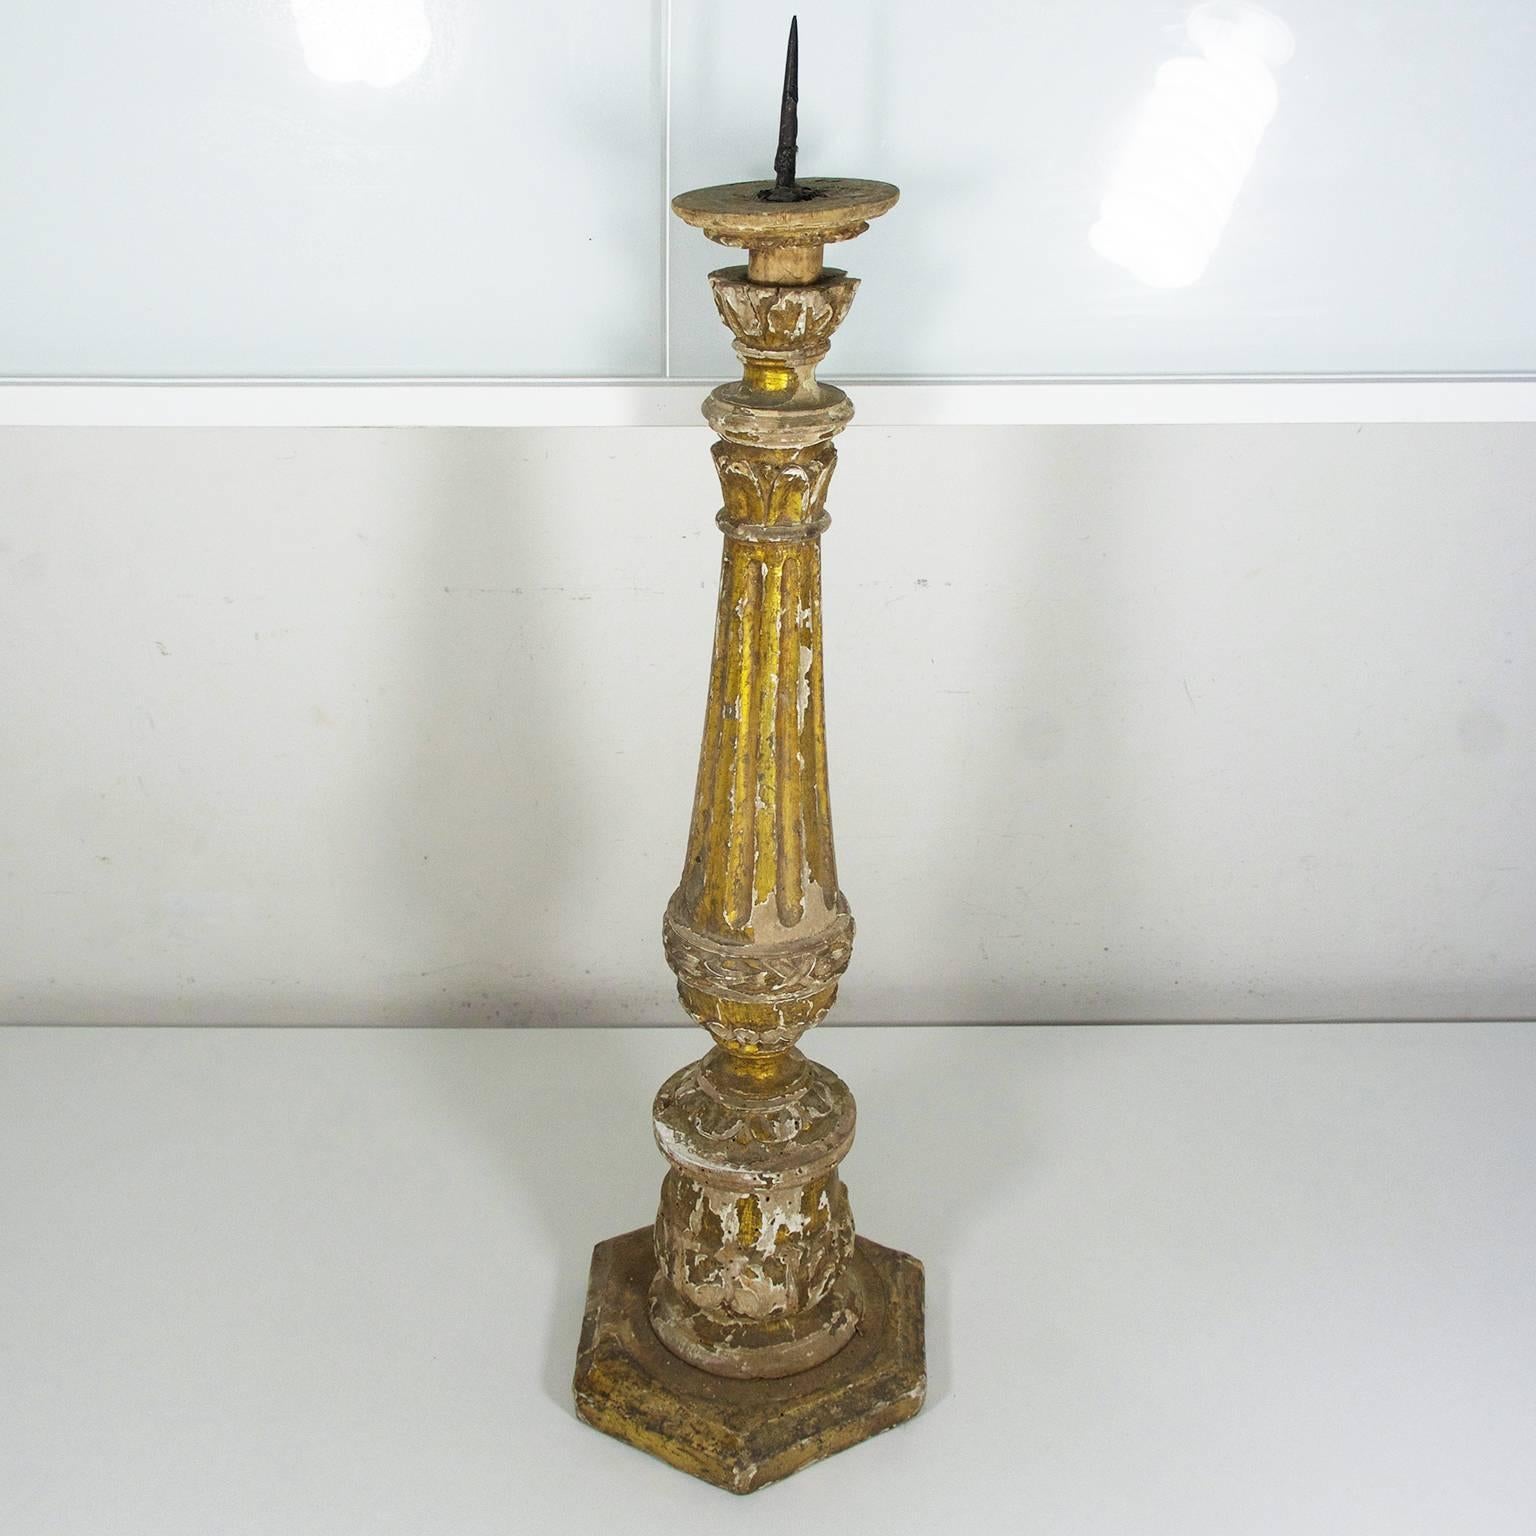 Antique Italian giltwood church altar candlestick,
mid-1700s.
Beautiful original condition - losses to surface and paint (please see all photos), old woodworm holes which are typical for antique wood items.

Measurements:
Height without needle: